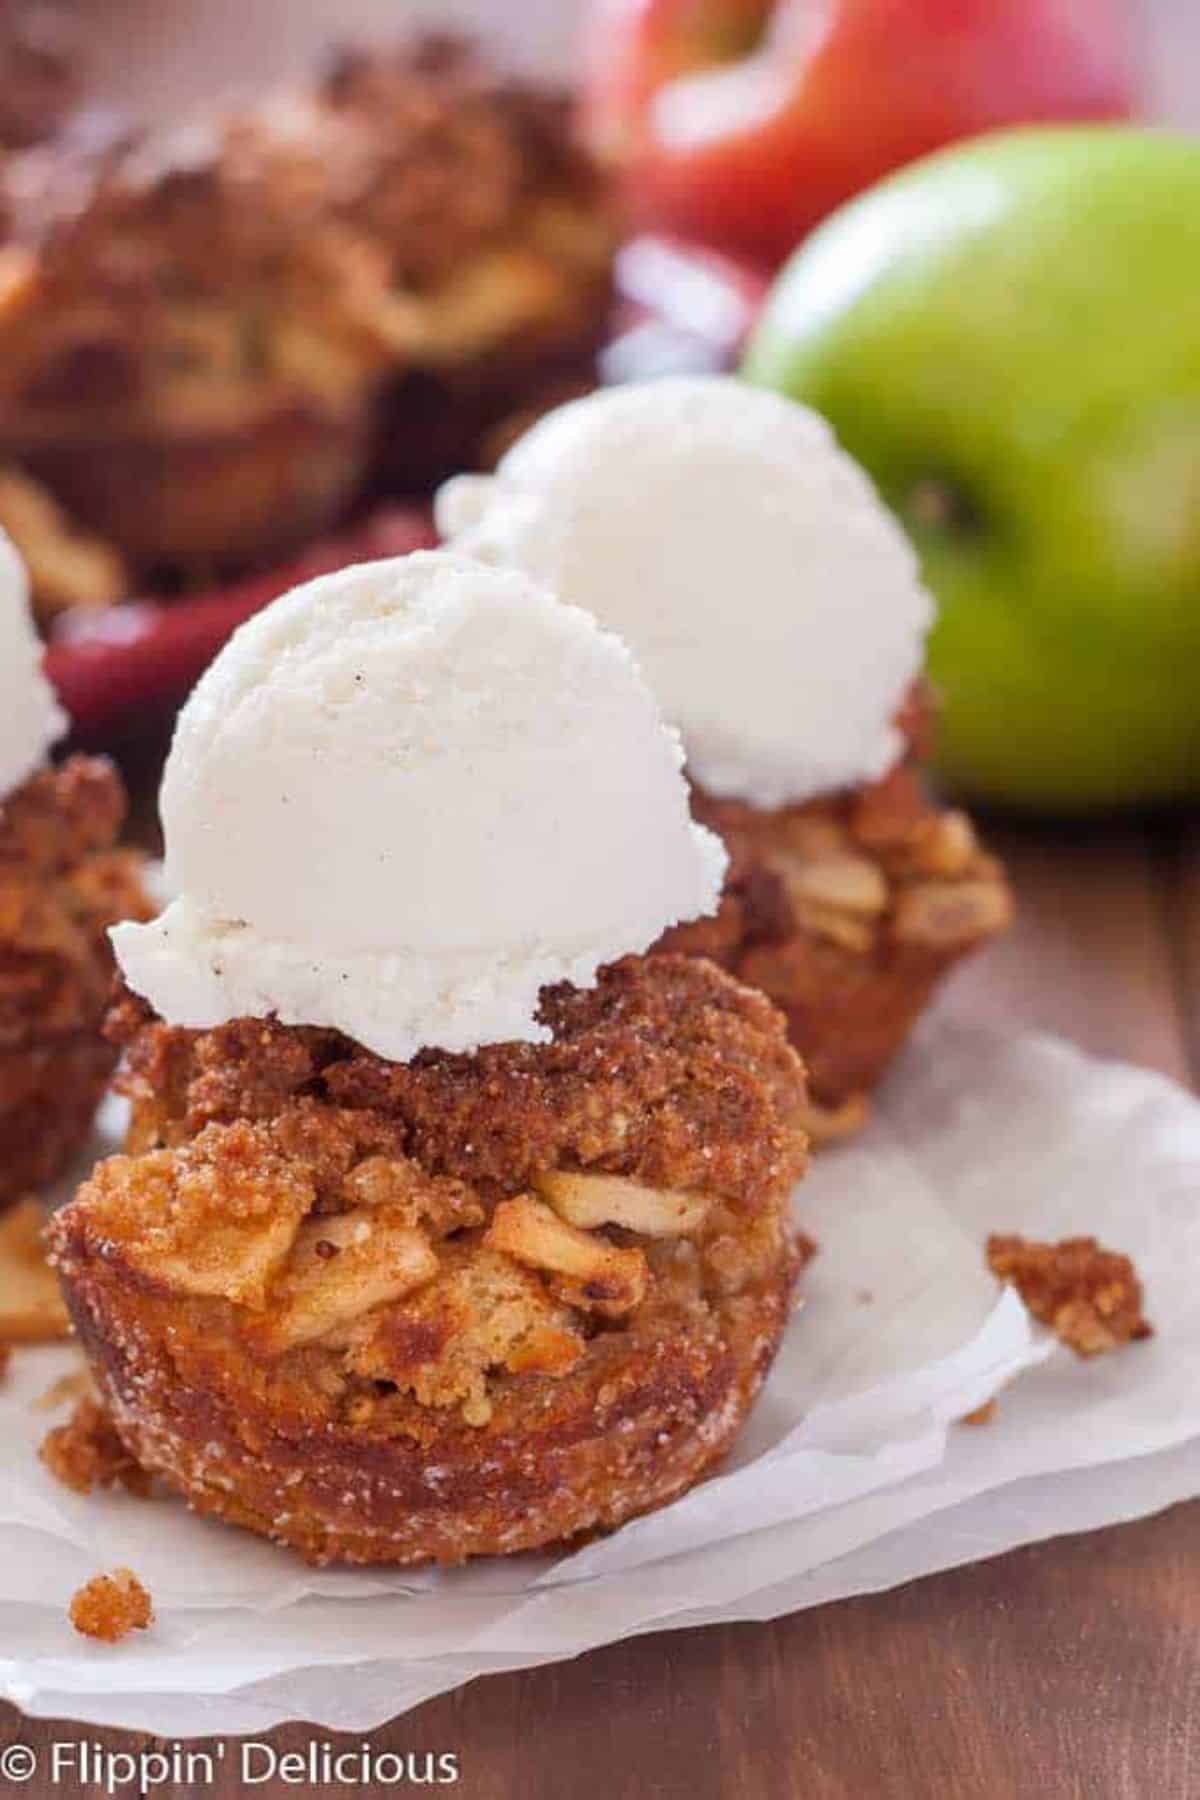 Delicious Gluten-Free Apple Brown Betties on a table.